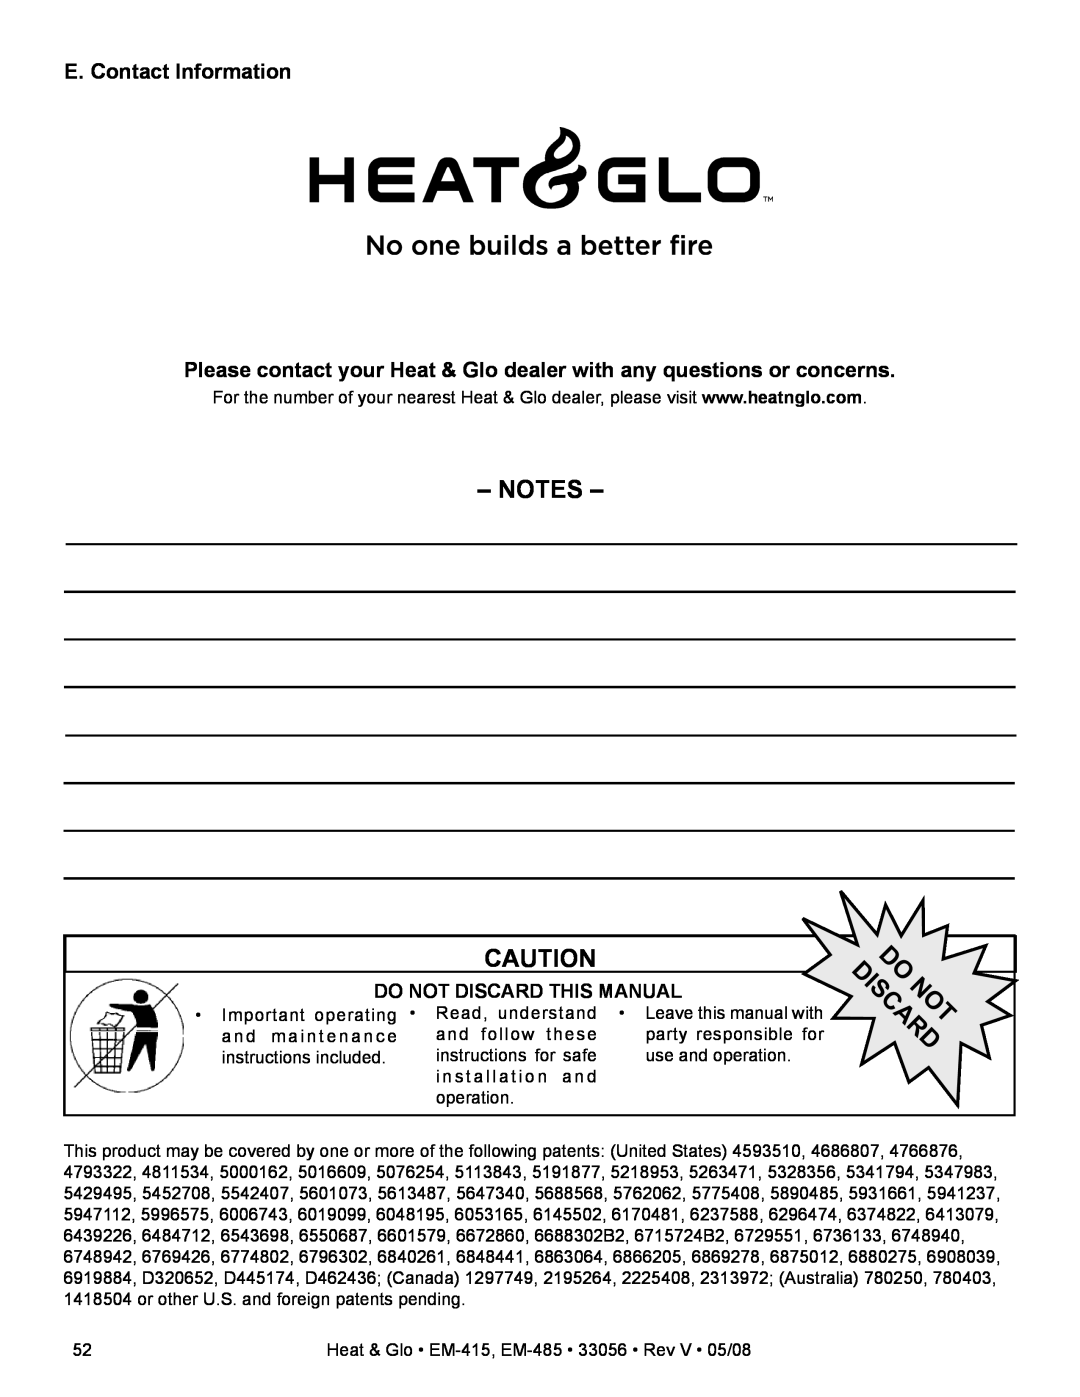 Heat & Glo LifeStyle EM-485TH, EM-415H owner manual E. Contact Information, Do Not Discard This Manual, Do Discardnot 